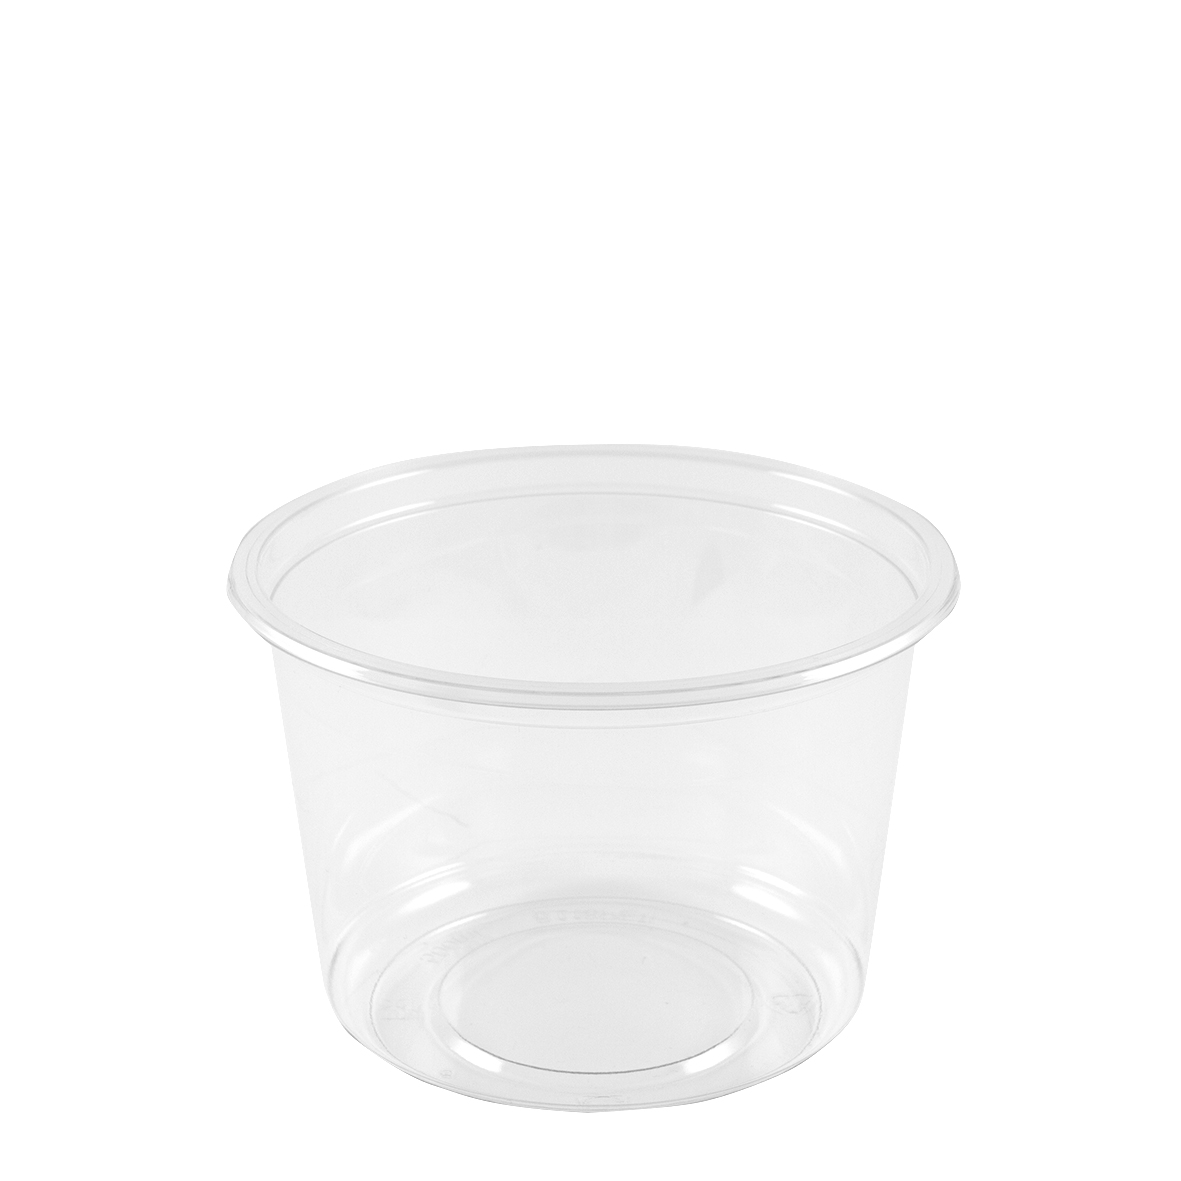 Tusipack Round Food Cup, 500 ml